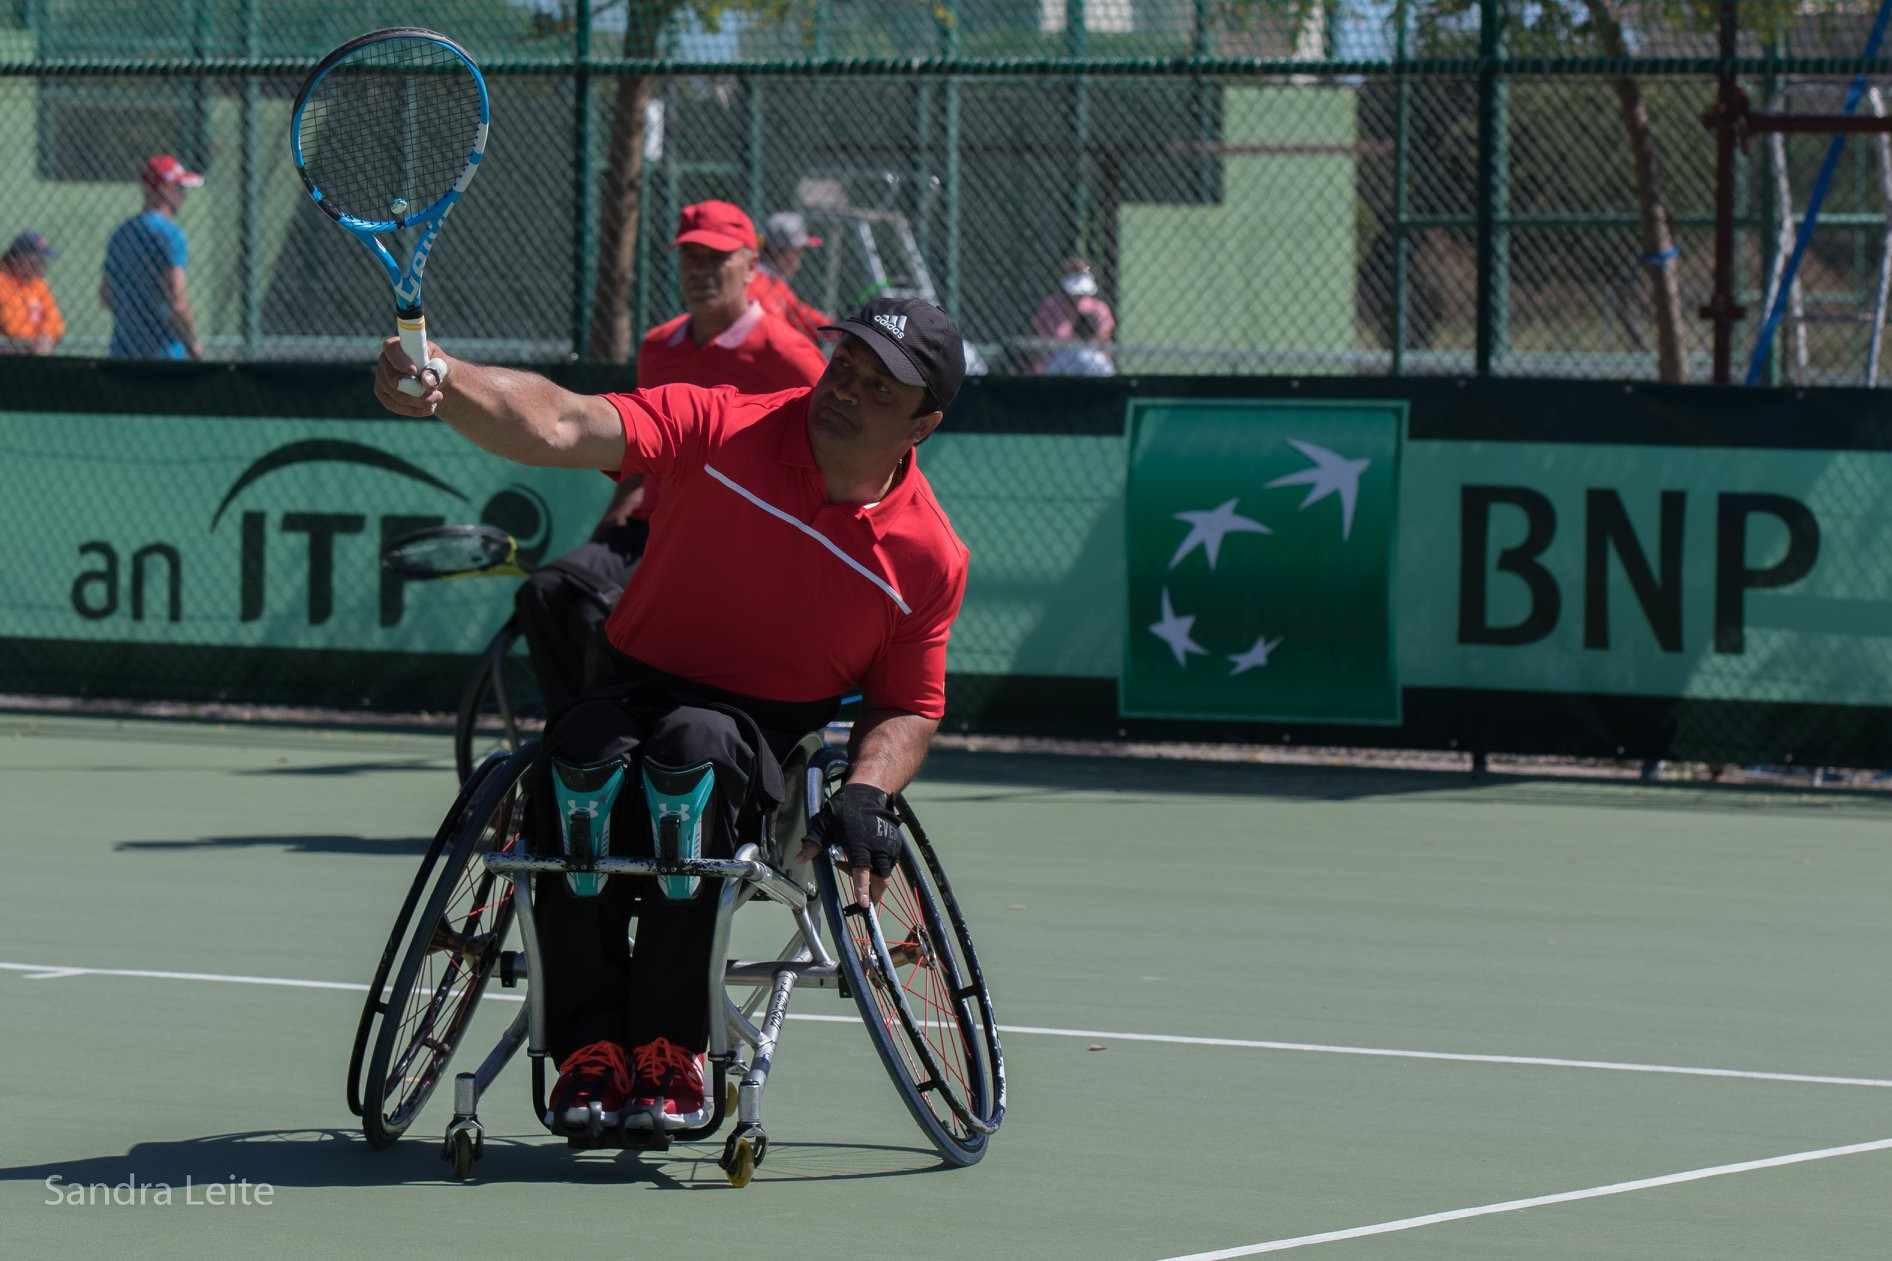 Semi-final line-up confirmed at ITF World Team Cup European qualifier 